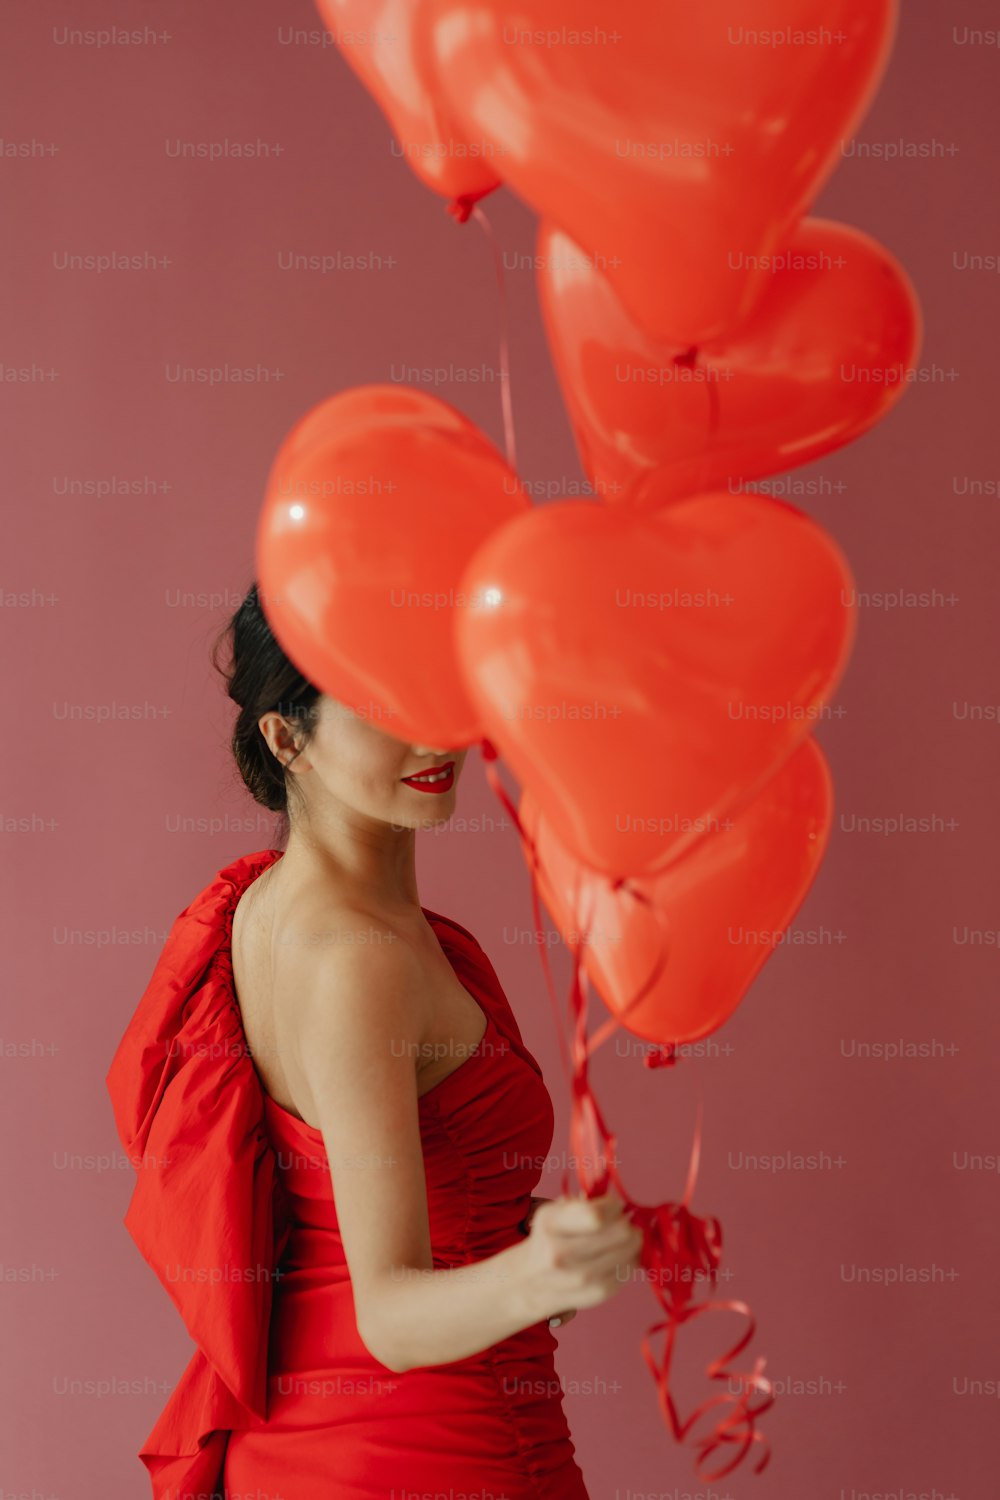 a woman in a red dress holding a bunch of red balloons